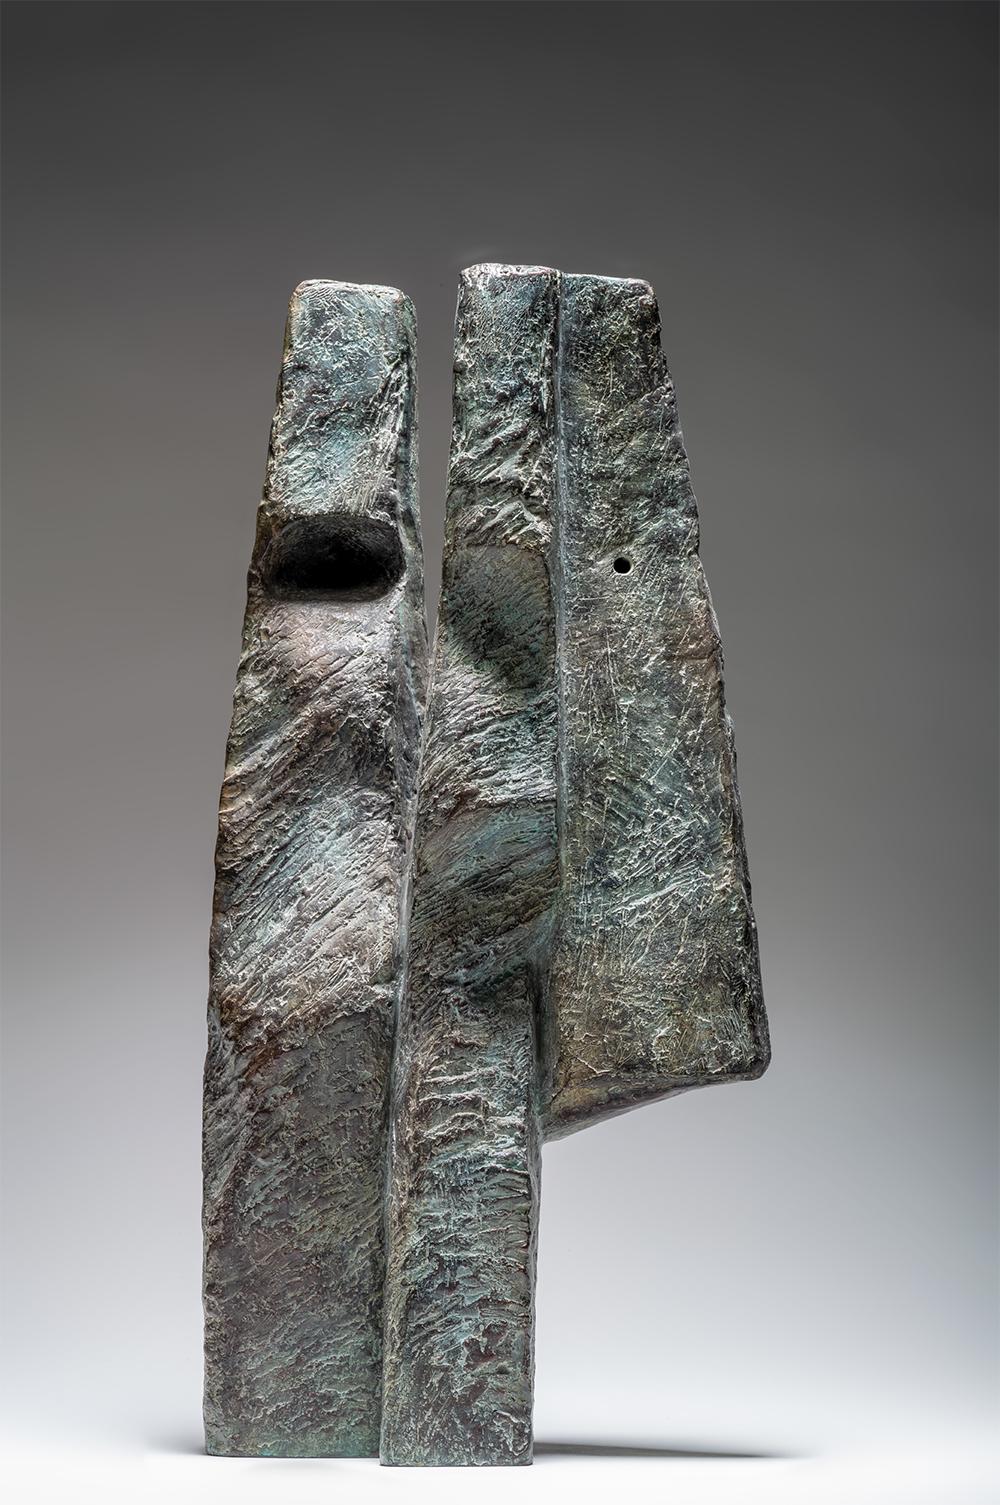 Janus Heads by Martine Demal - Contemporary bronze sculpture, abstract, grey For Sale 1